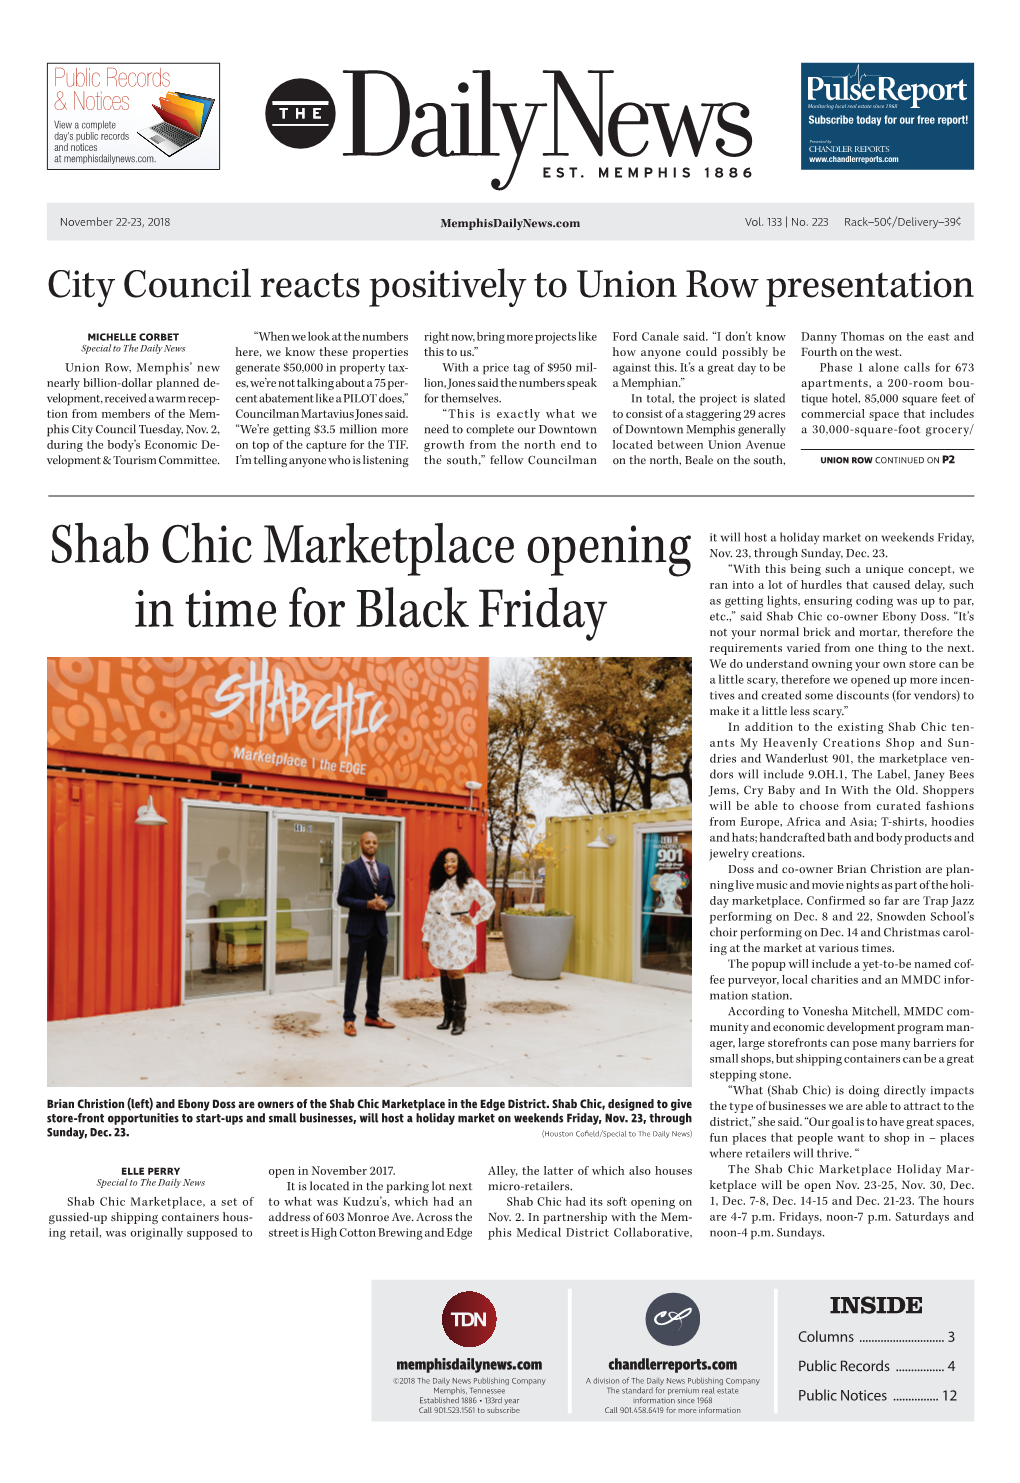 Shab Chic Marketplace Opening in Time for Black Friday